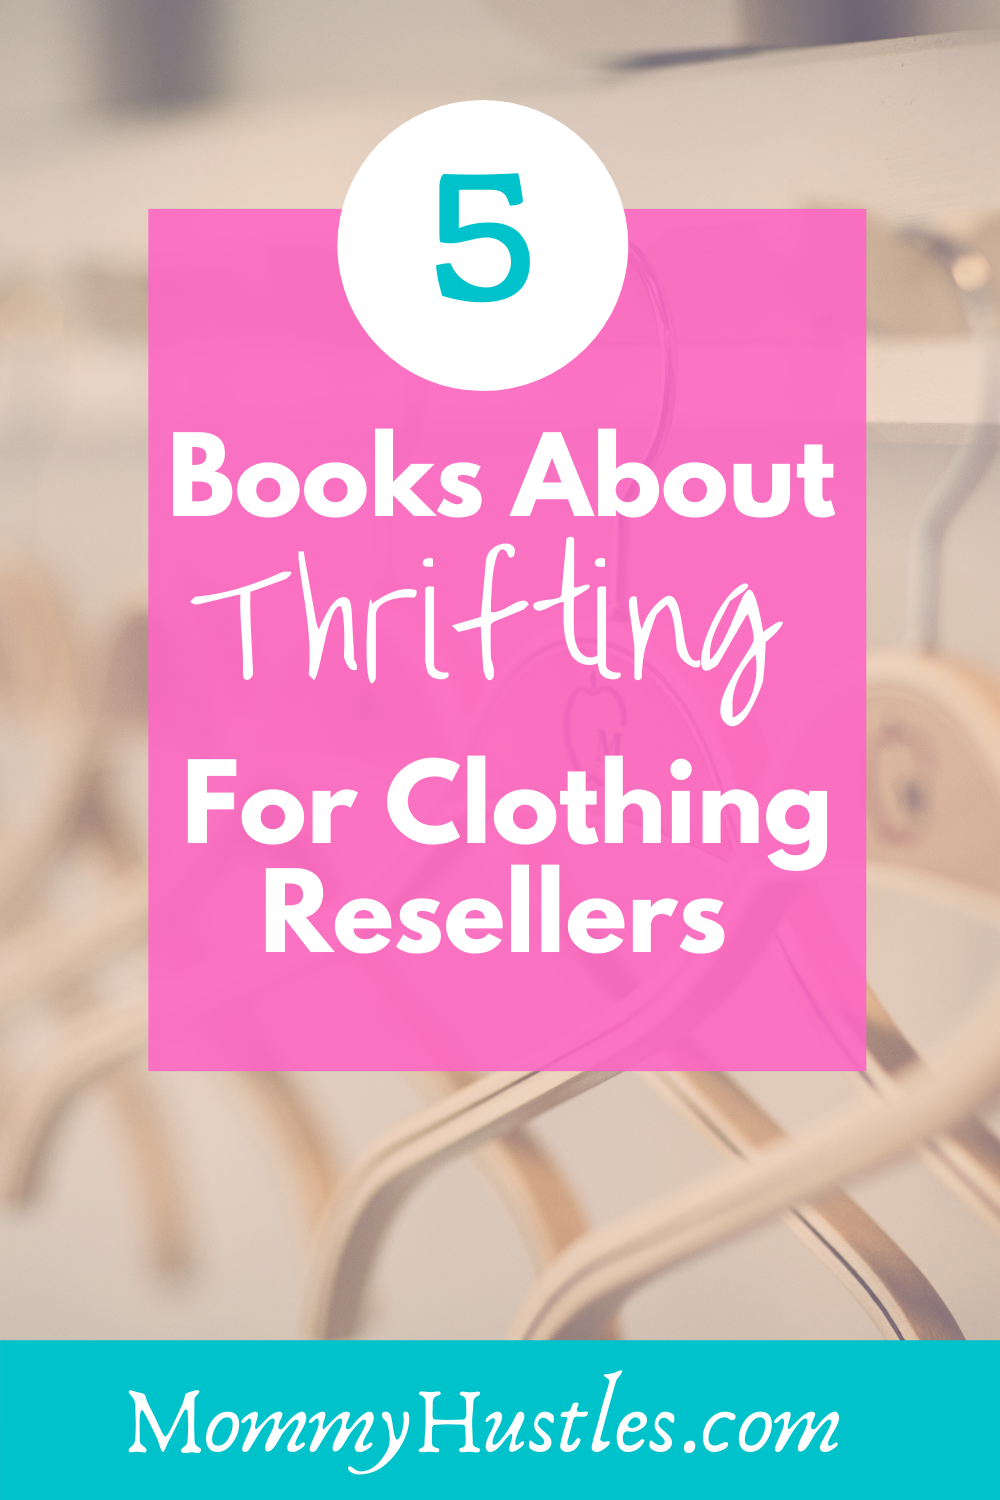 5 Books About Thrifting for Clothing Resellers